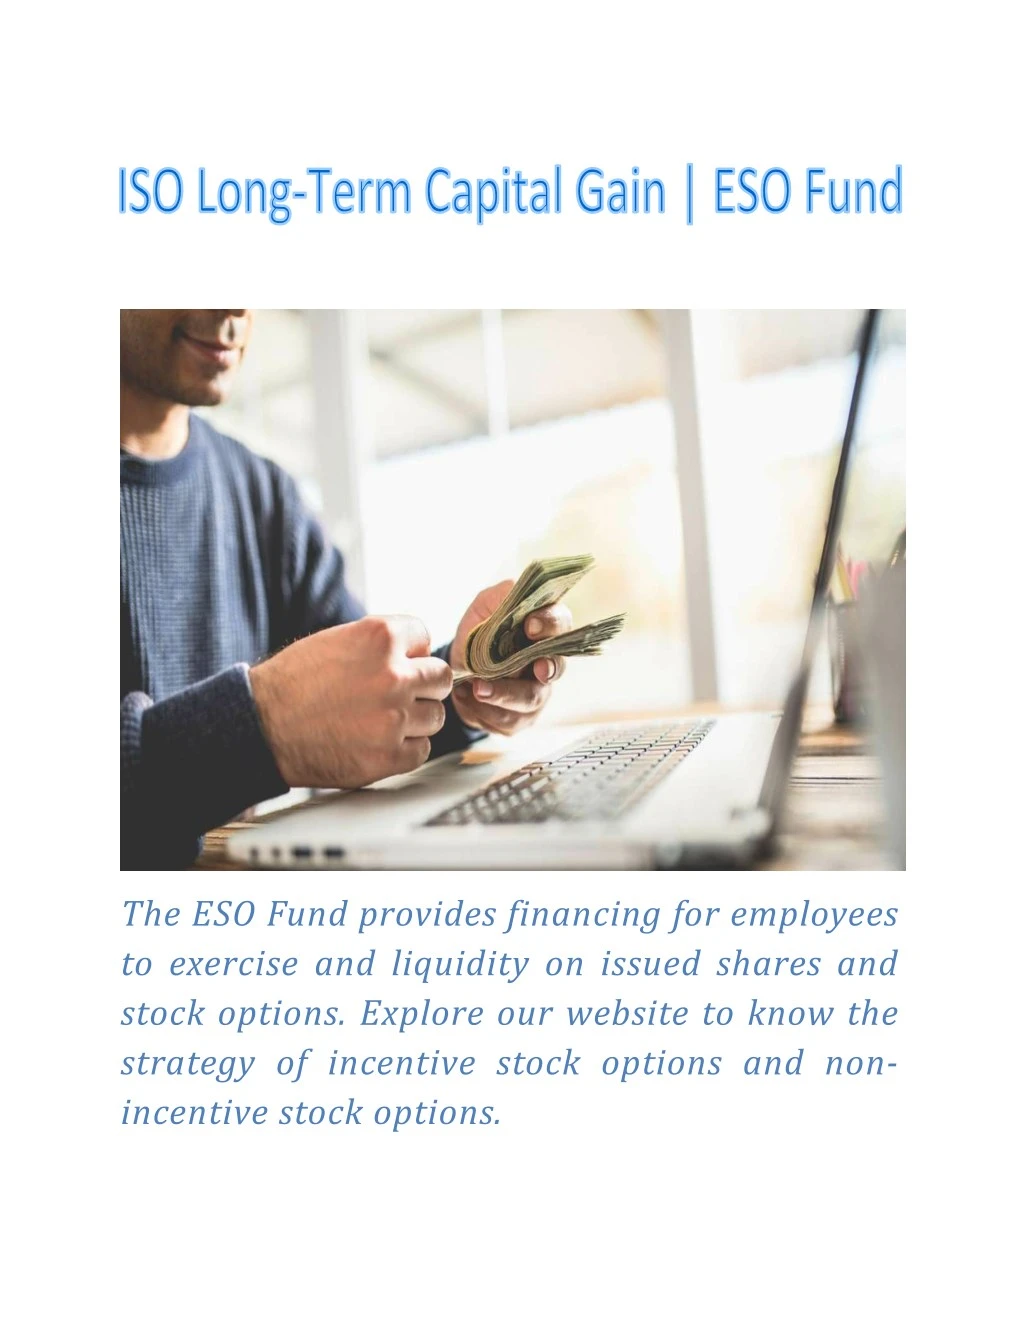 the eso fund provides financing for employees